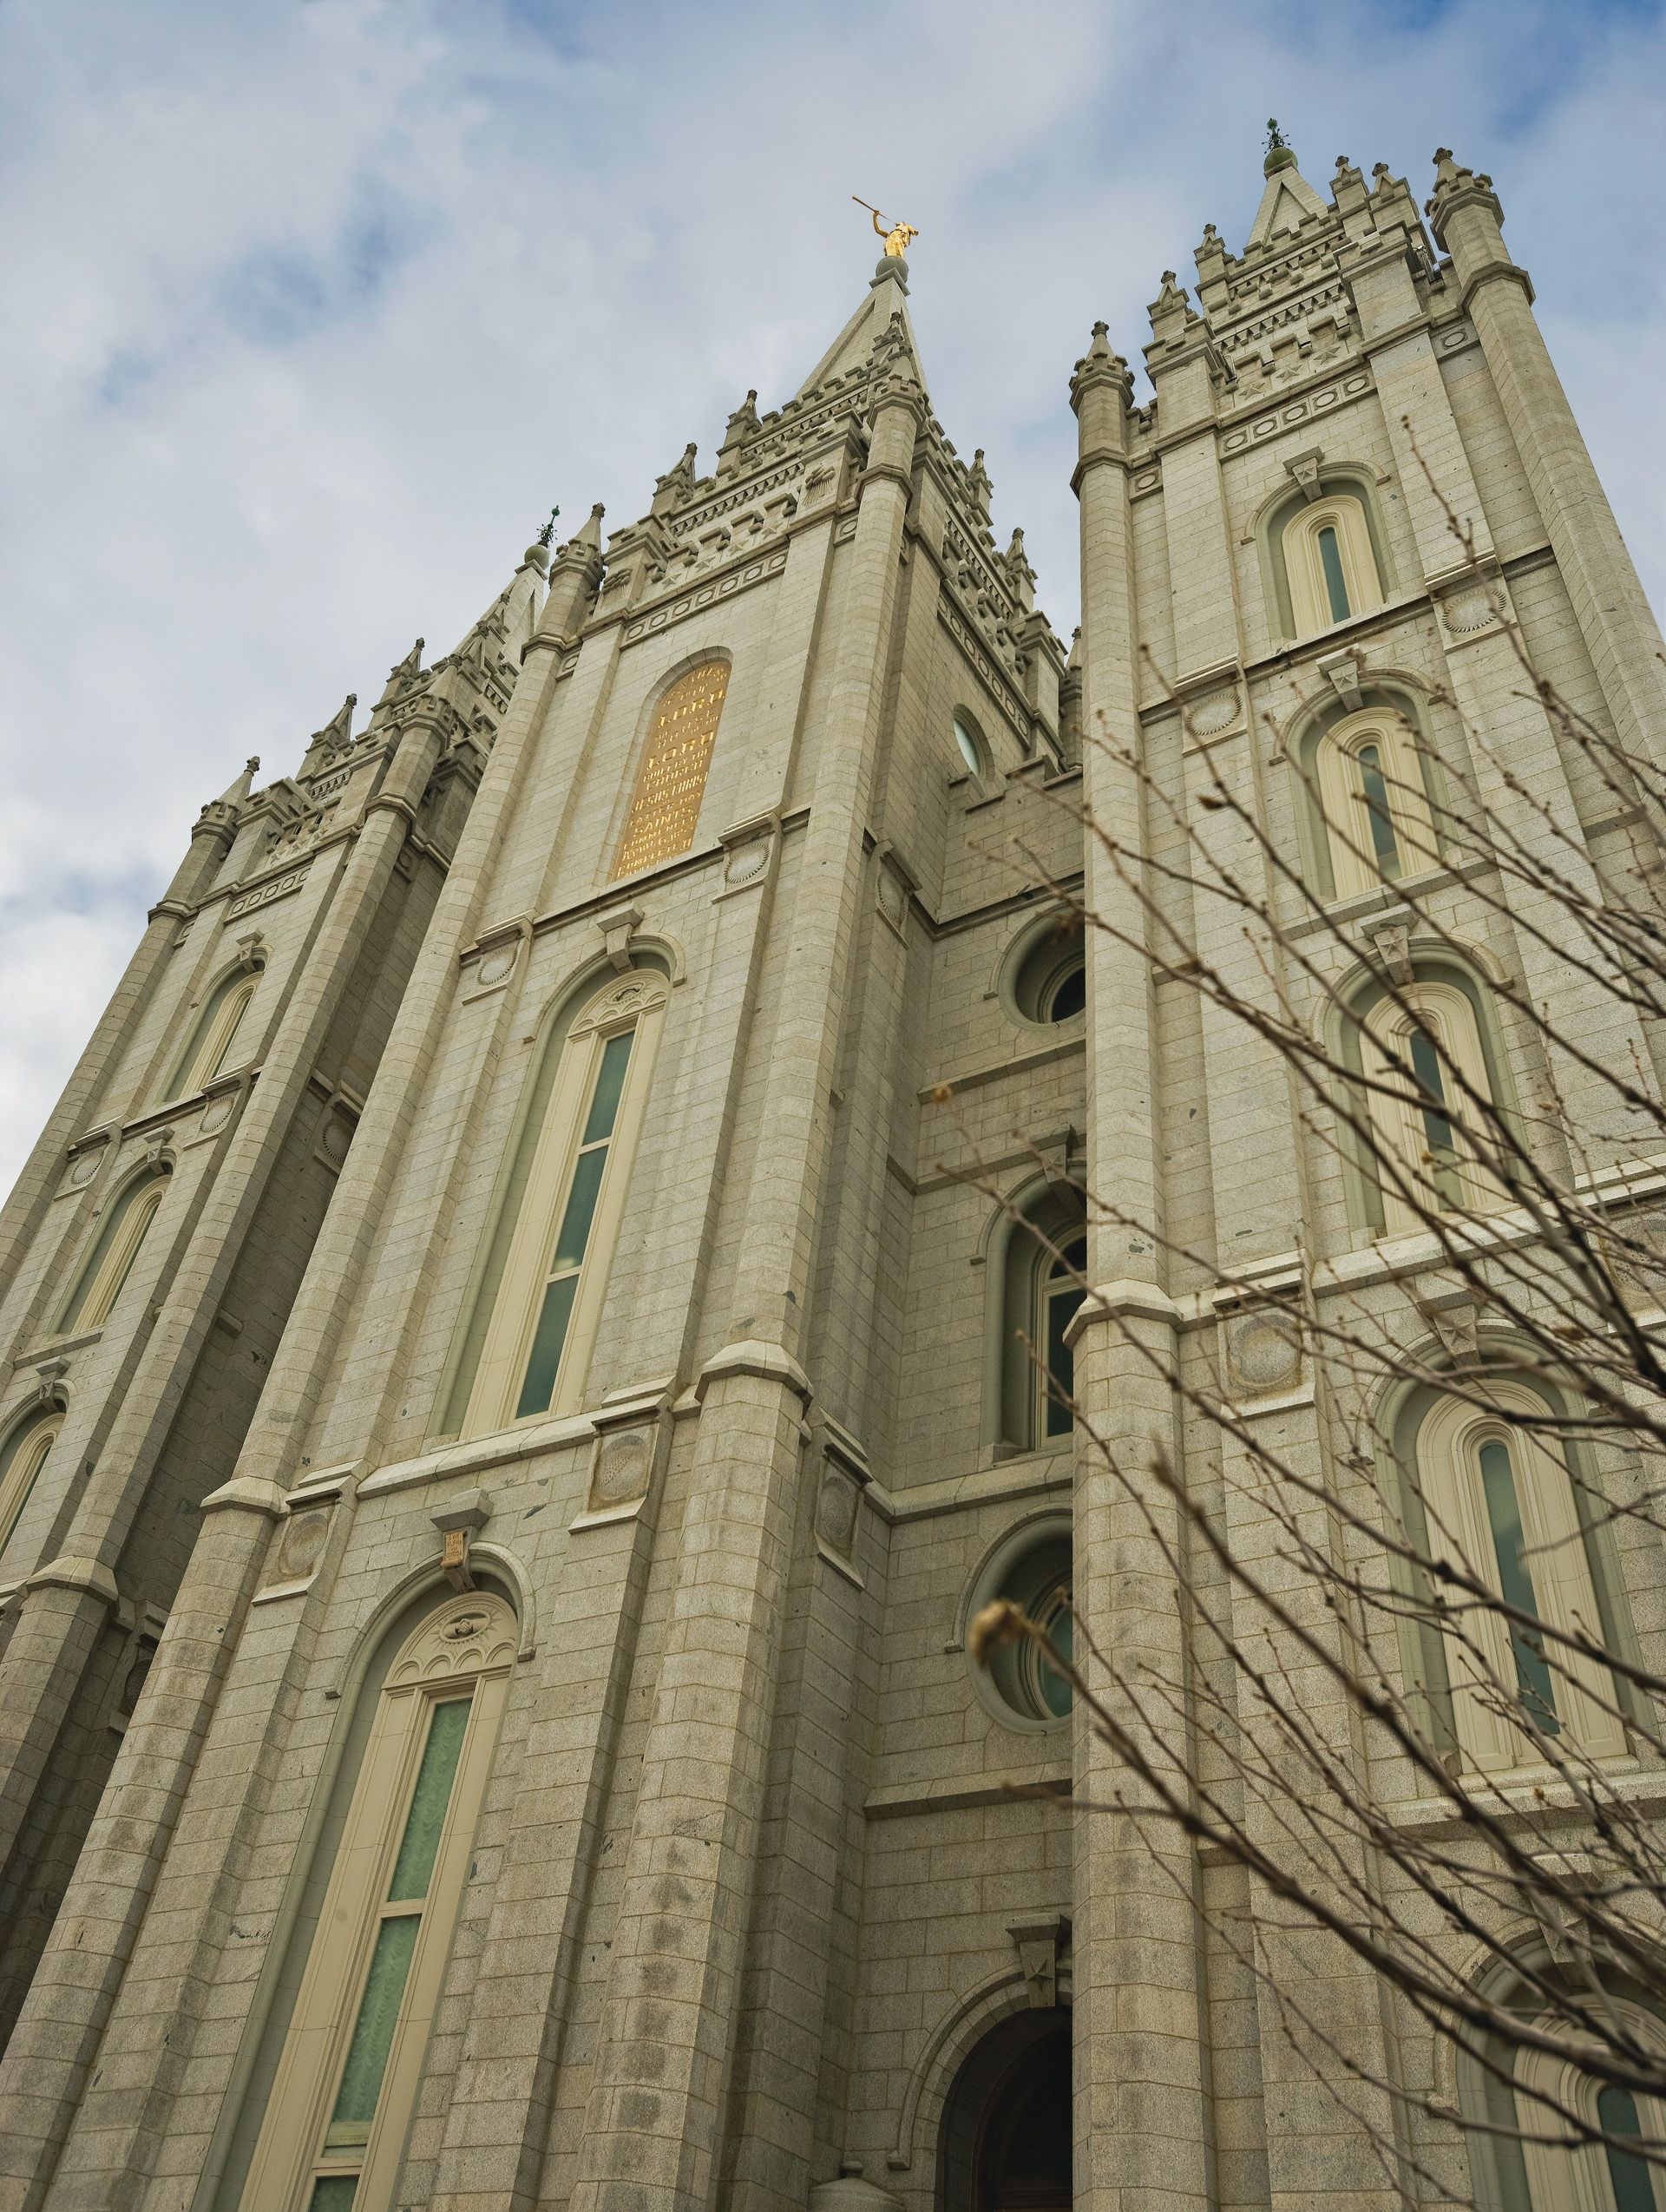 The Salt Lake Temple, including the windows and spires.